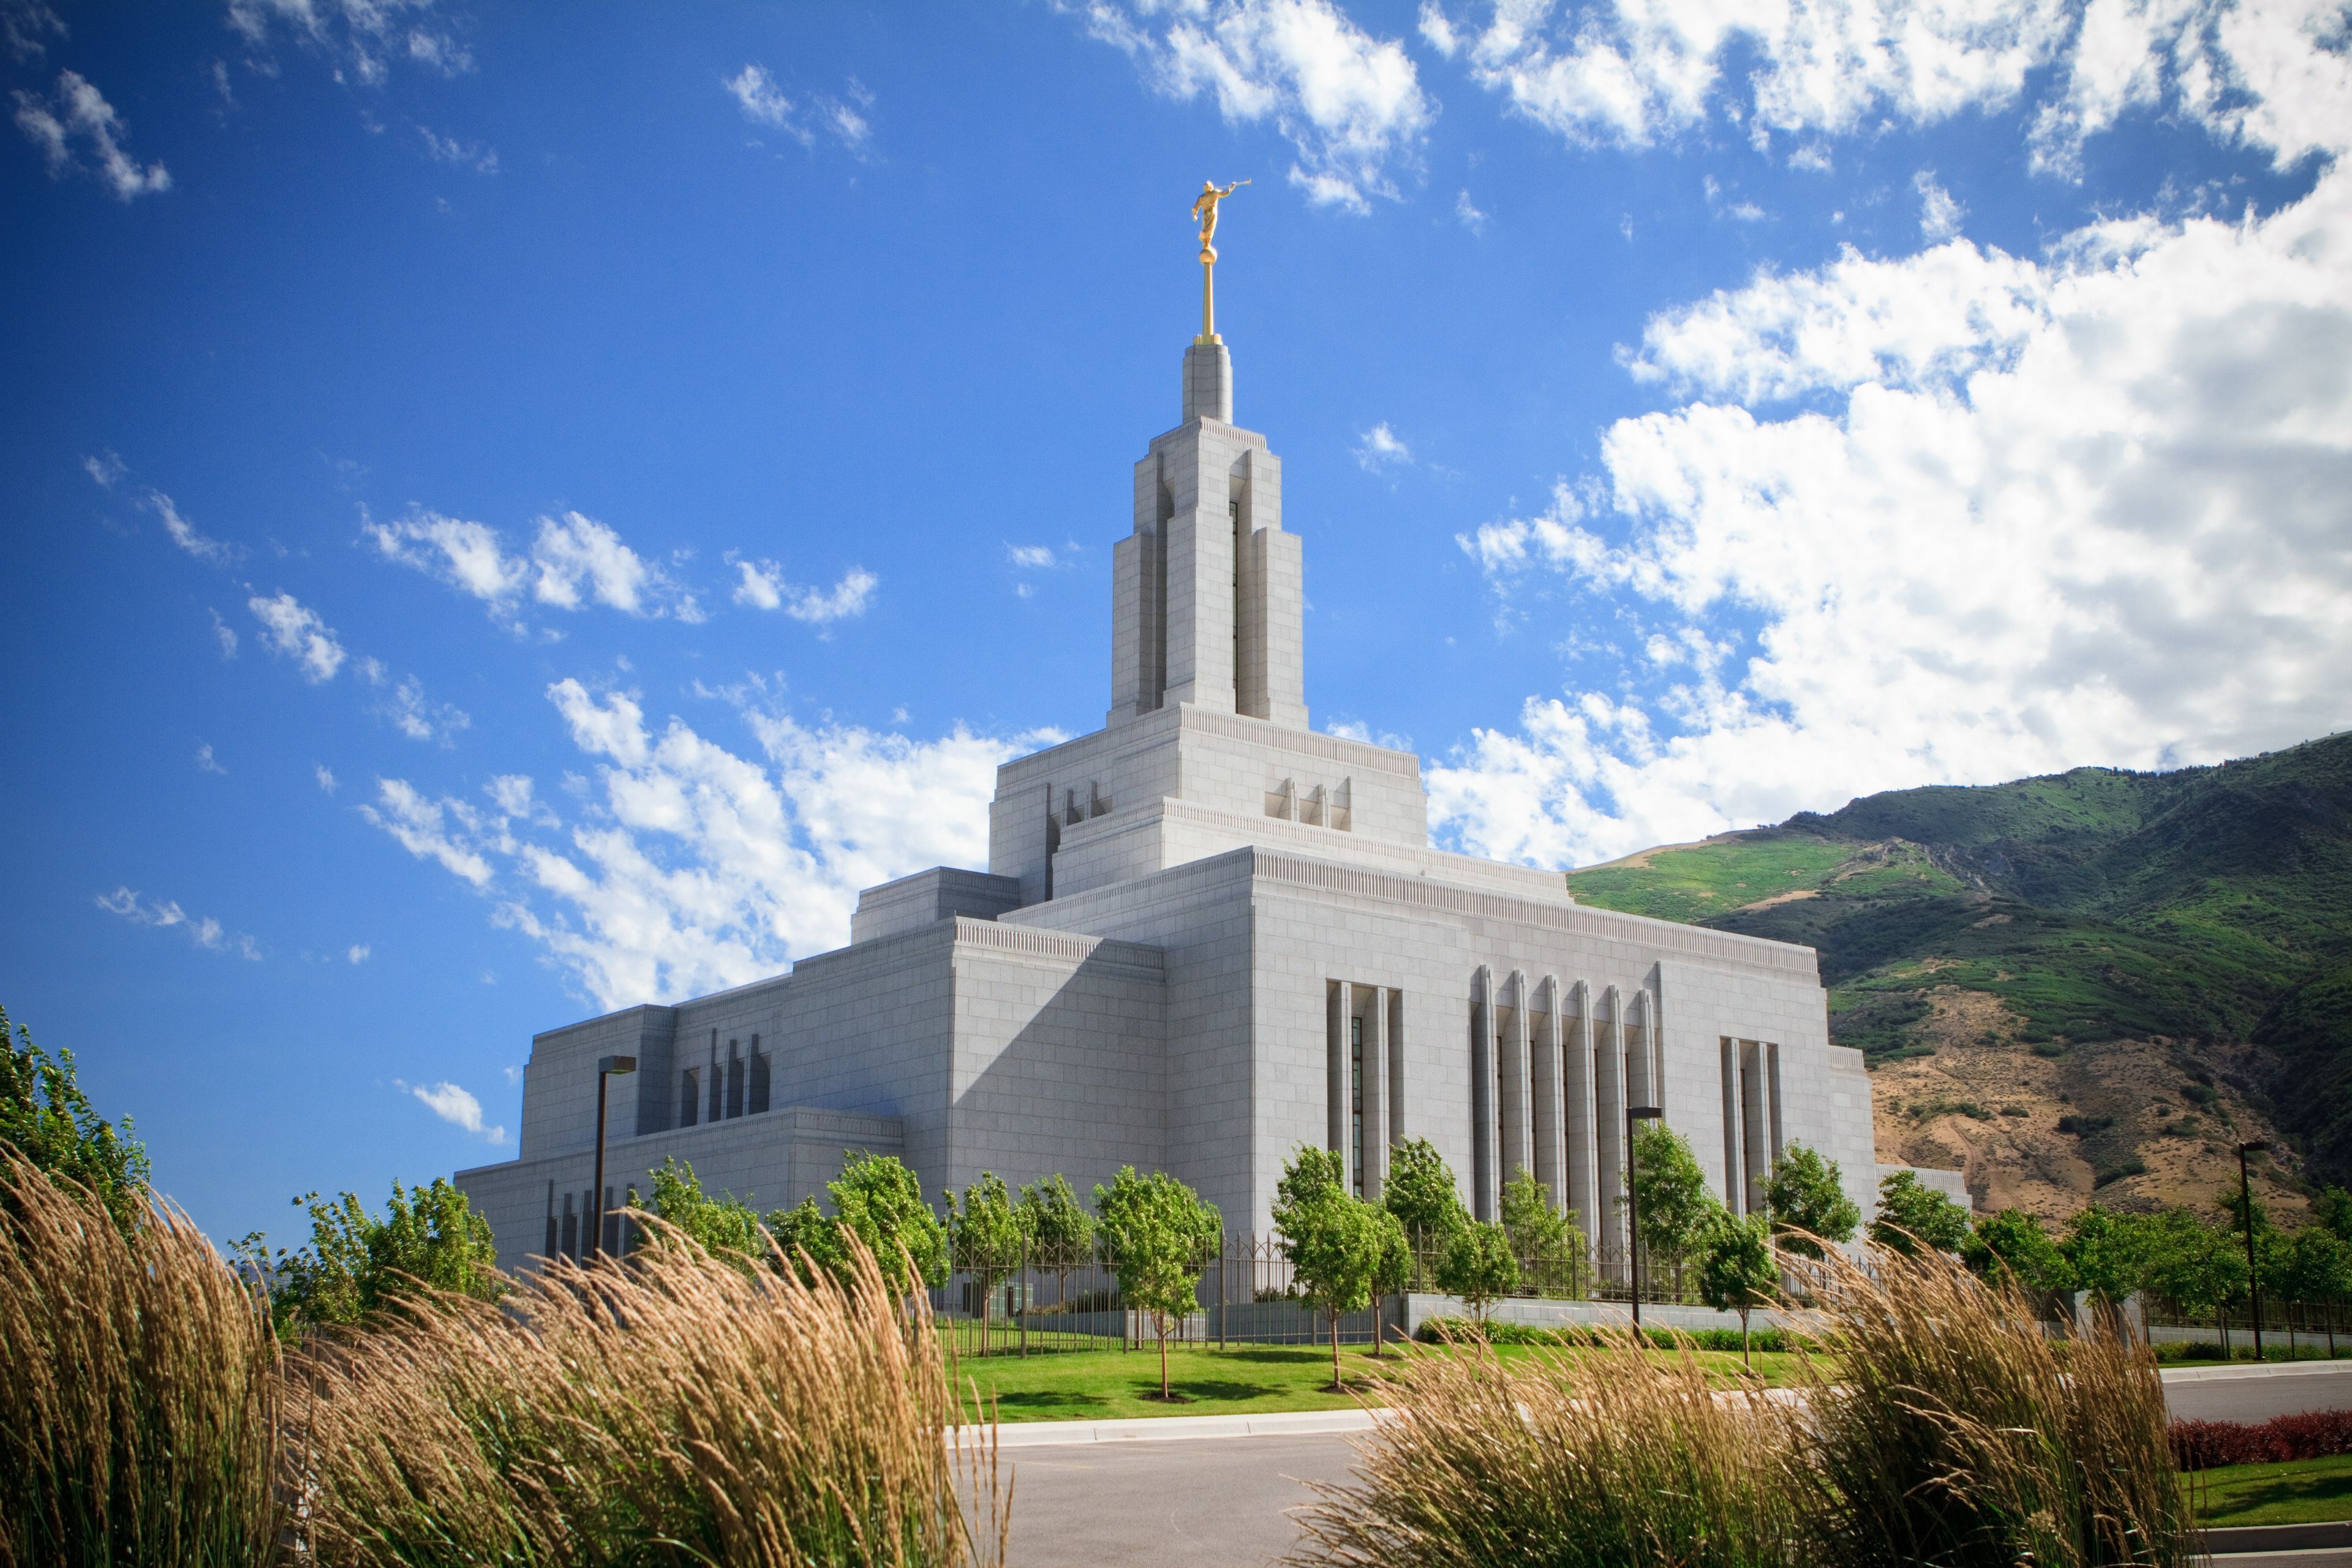 The Draper Utah Temple and grounds.